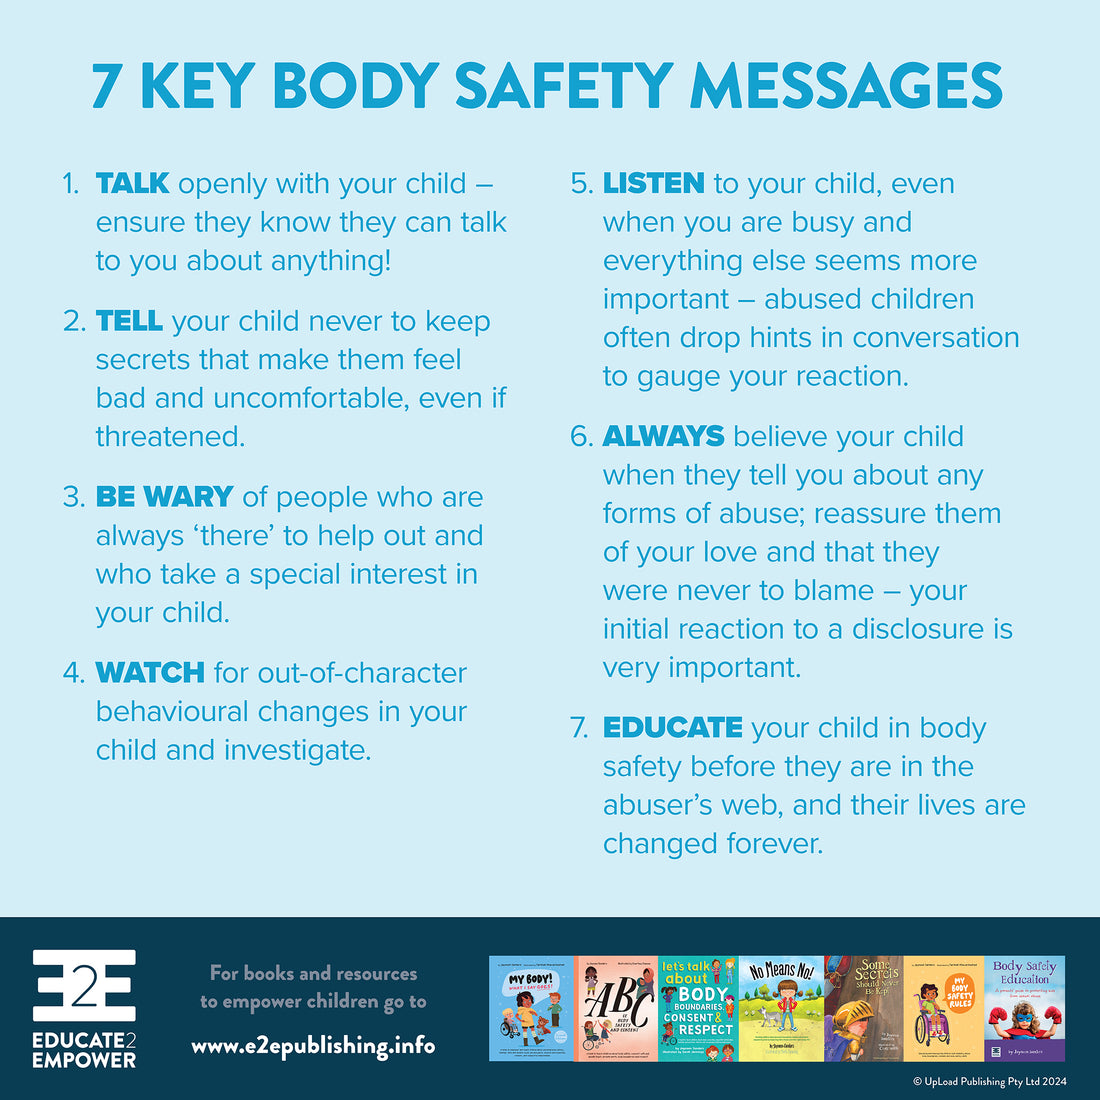 7 KEY BODY SAFETY MESSAGES